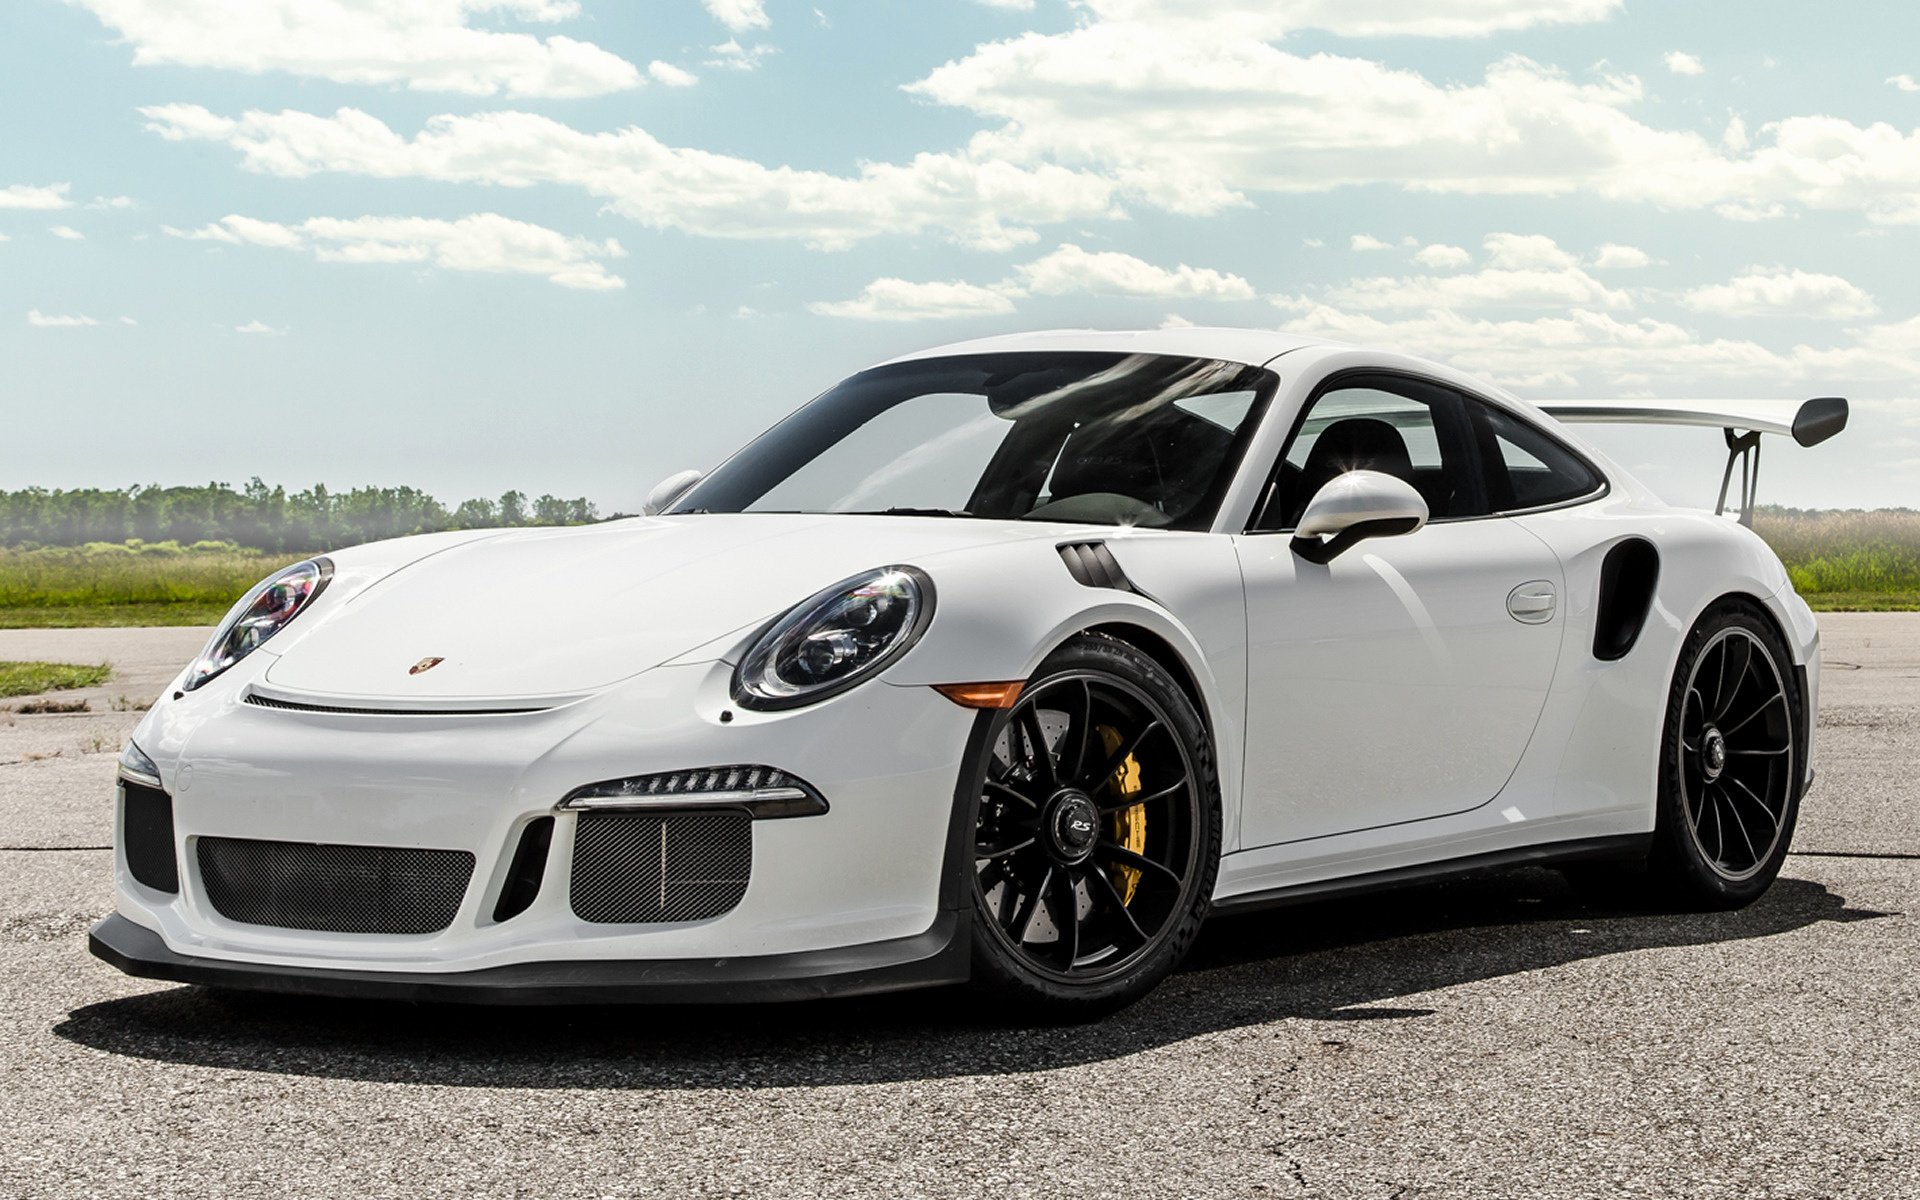 Porsche 911 GT3 RS 2016 US Wallpapers and HD Images